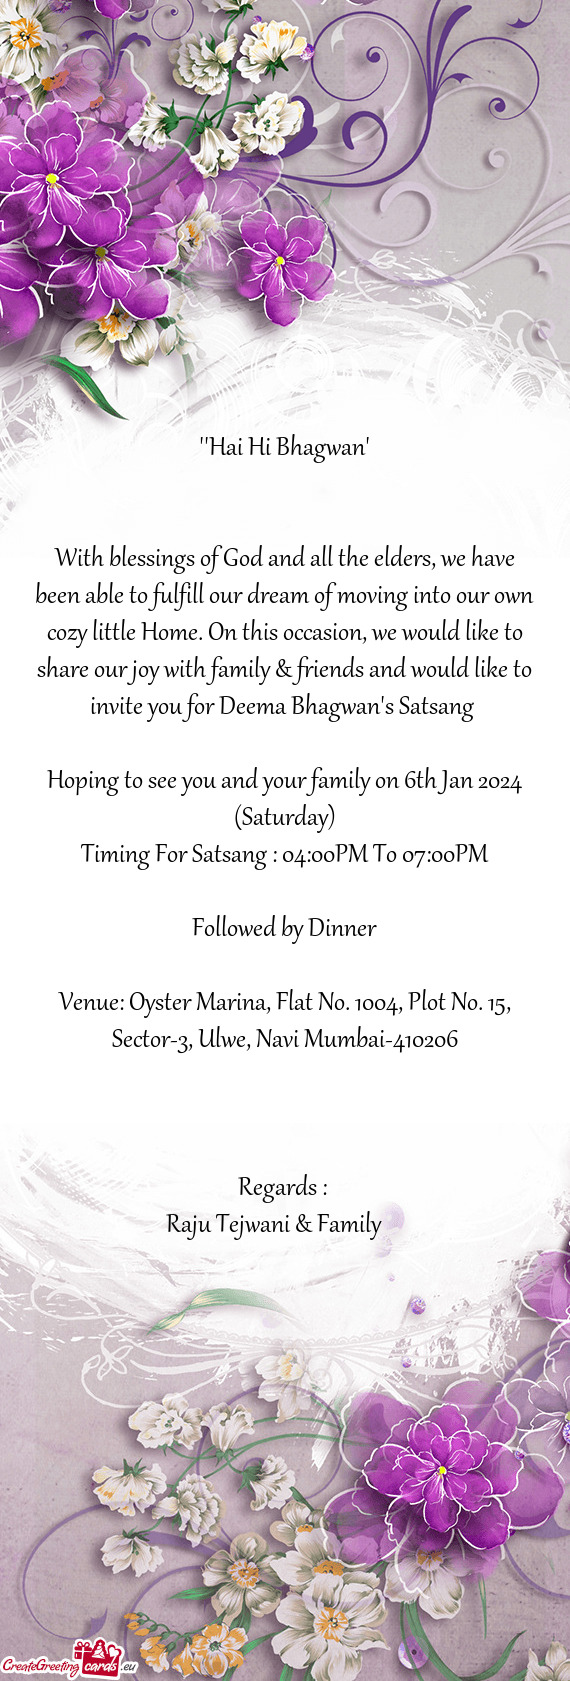 Hoping to see you and your family on 6th Jan 2024 (Saturday)